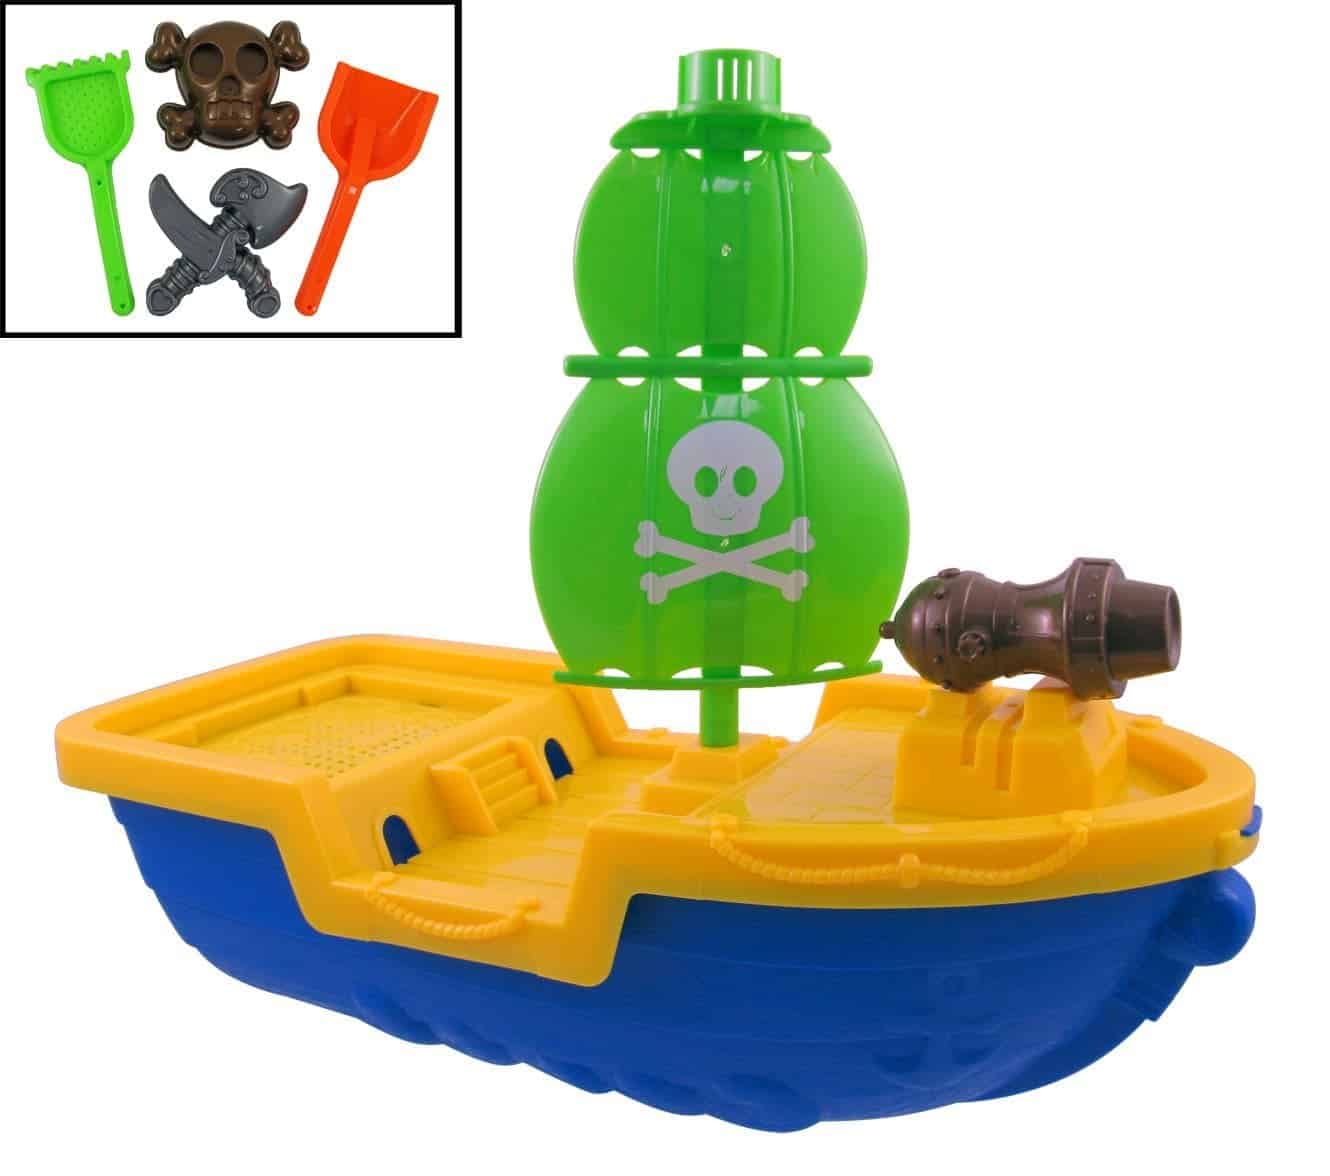 10+ Best Games and Toys for a Fun Day at the Beach: Pirate Ship Beach Toy Set| www.thepinningmama.com